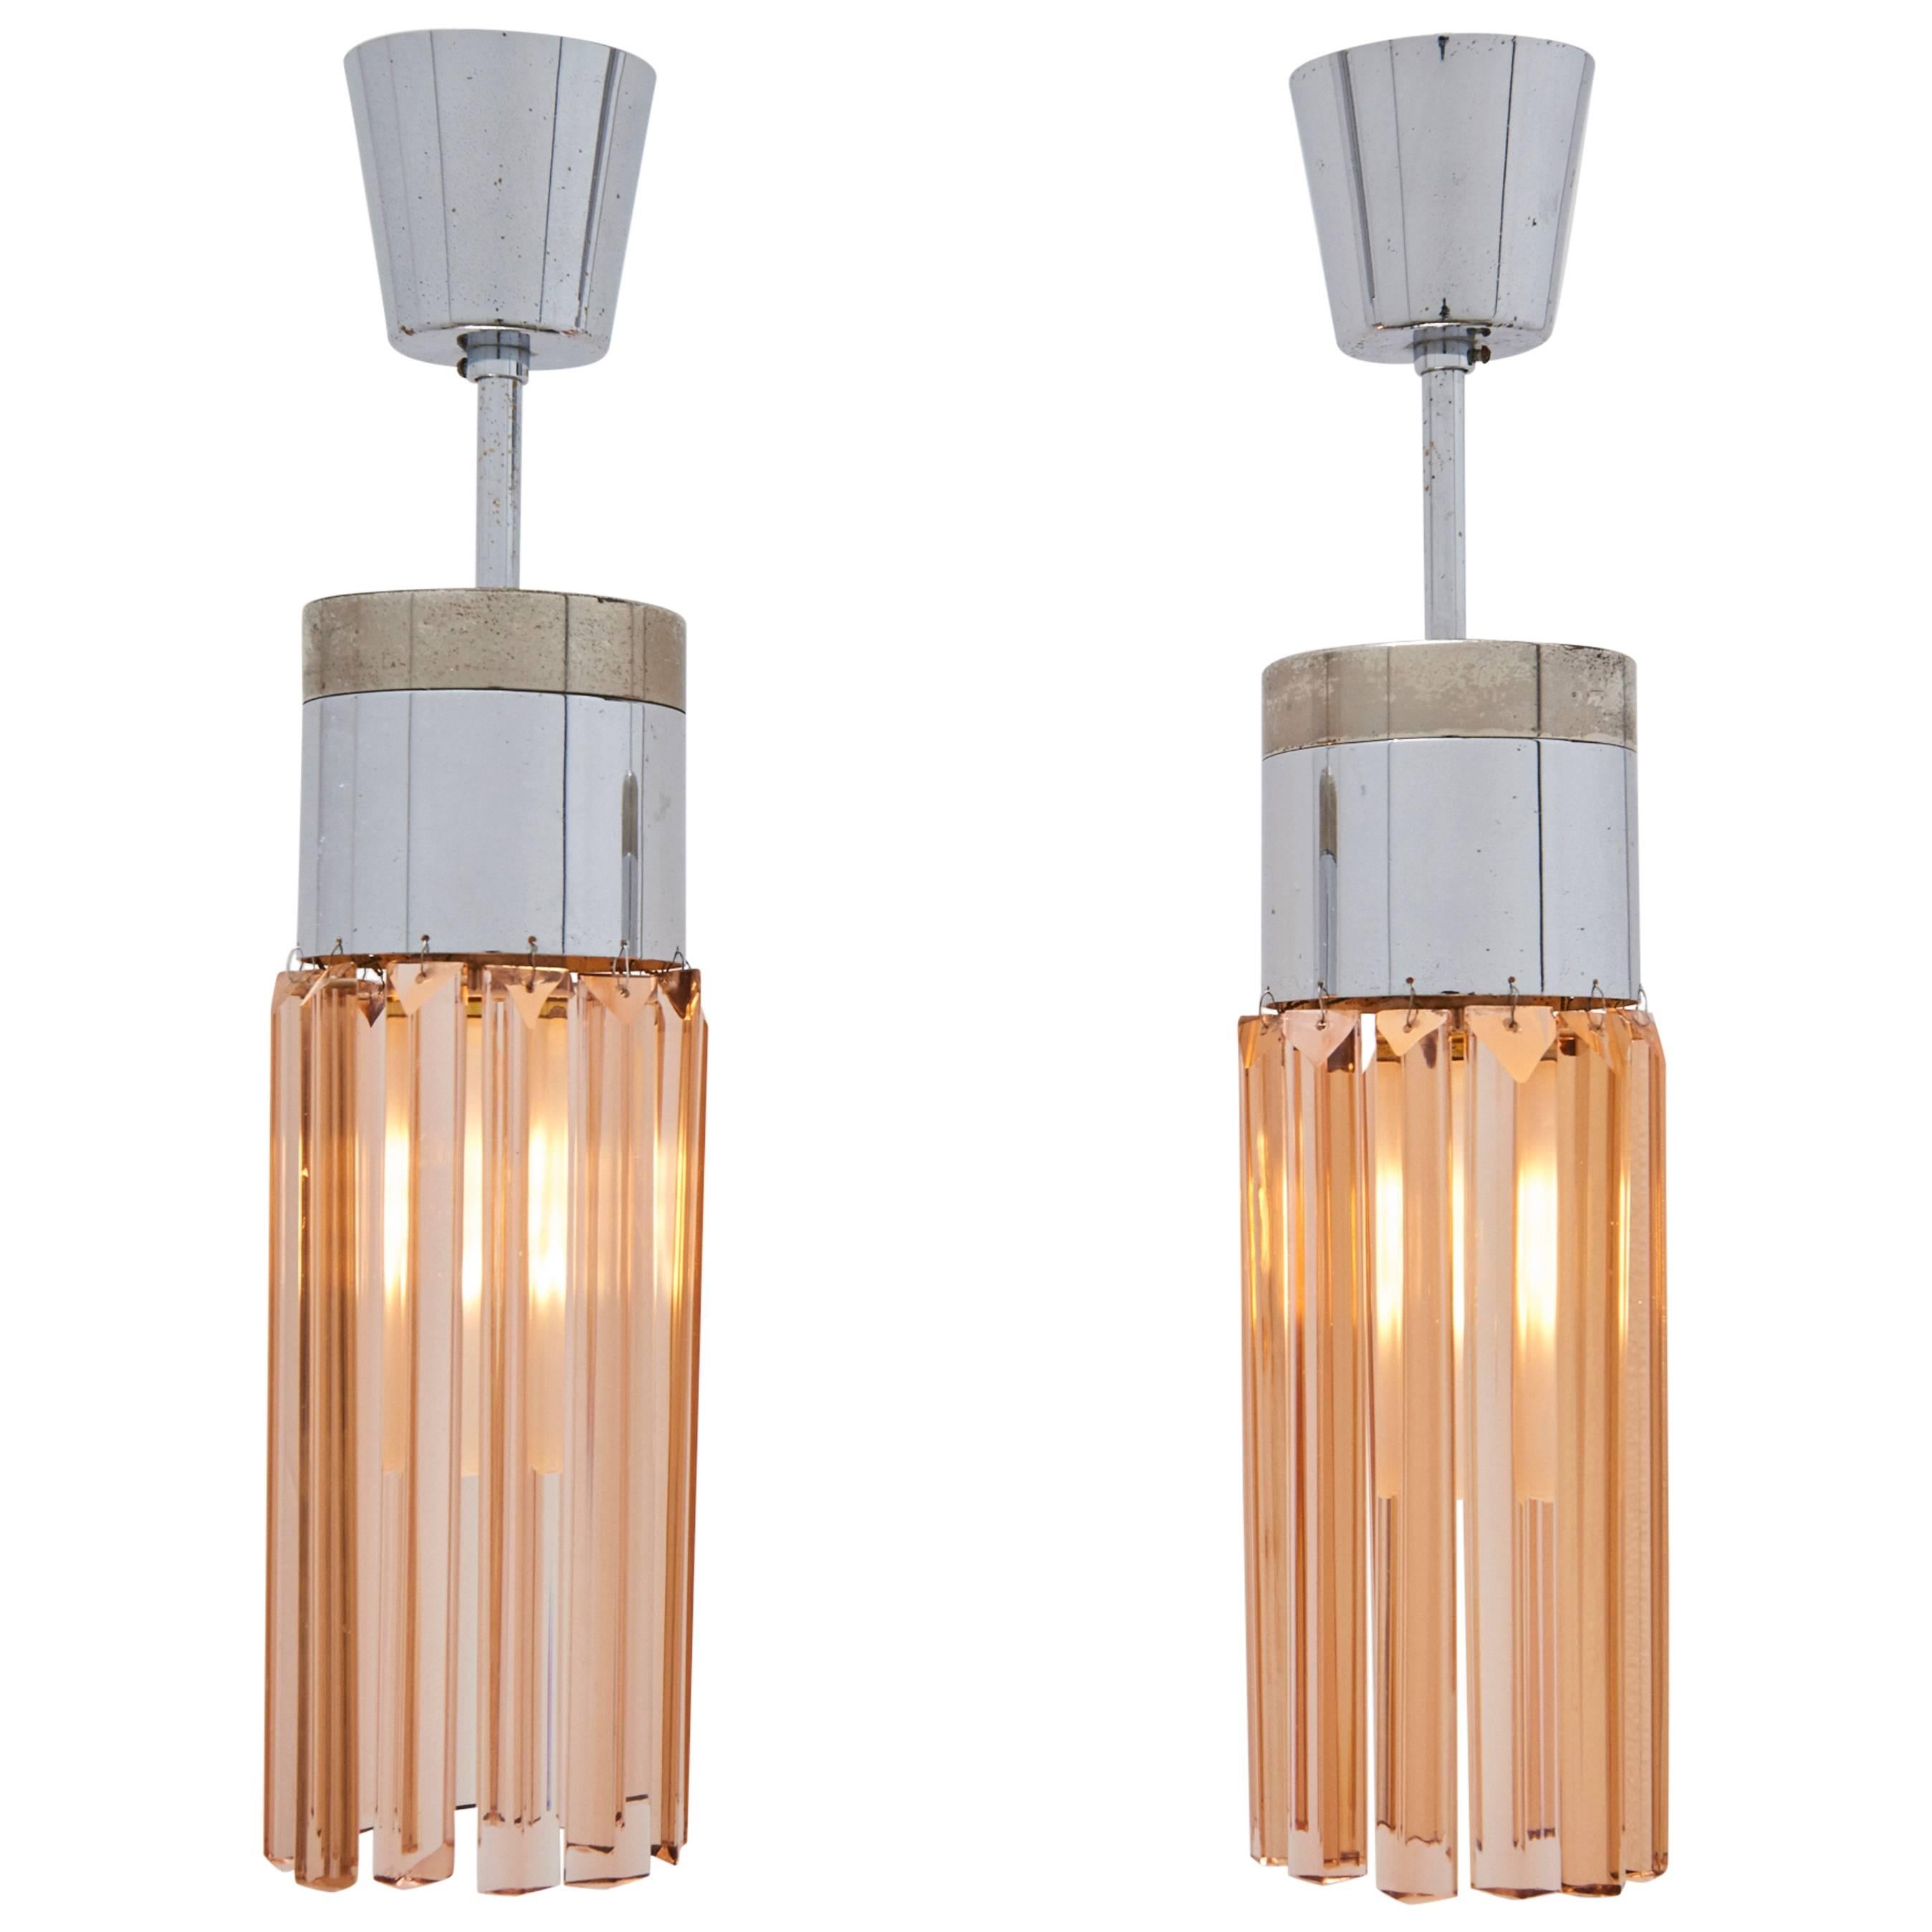 Vintage Pair of Peach Crystal Pendant Lamps, Model No. 1327 by Stilnovo, 1960s For Sale